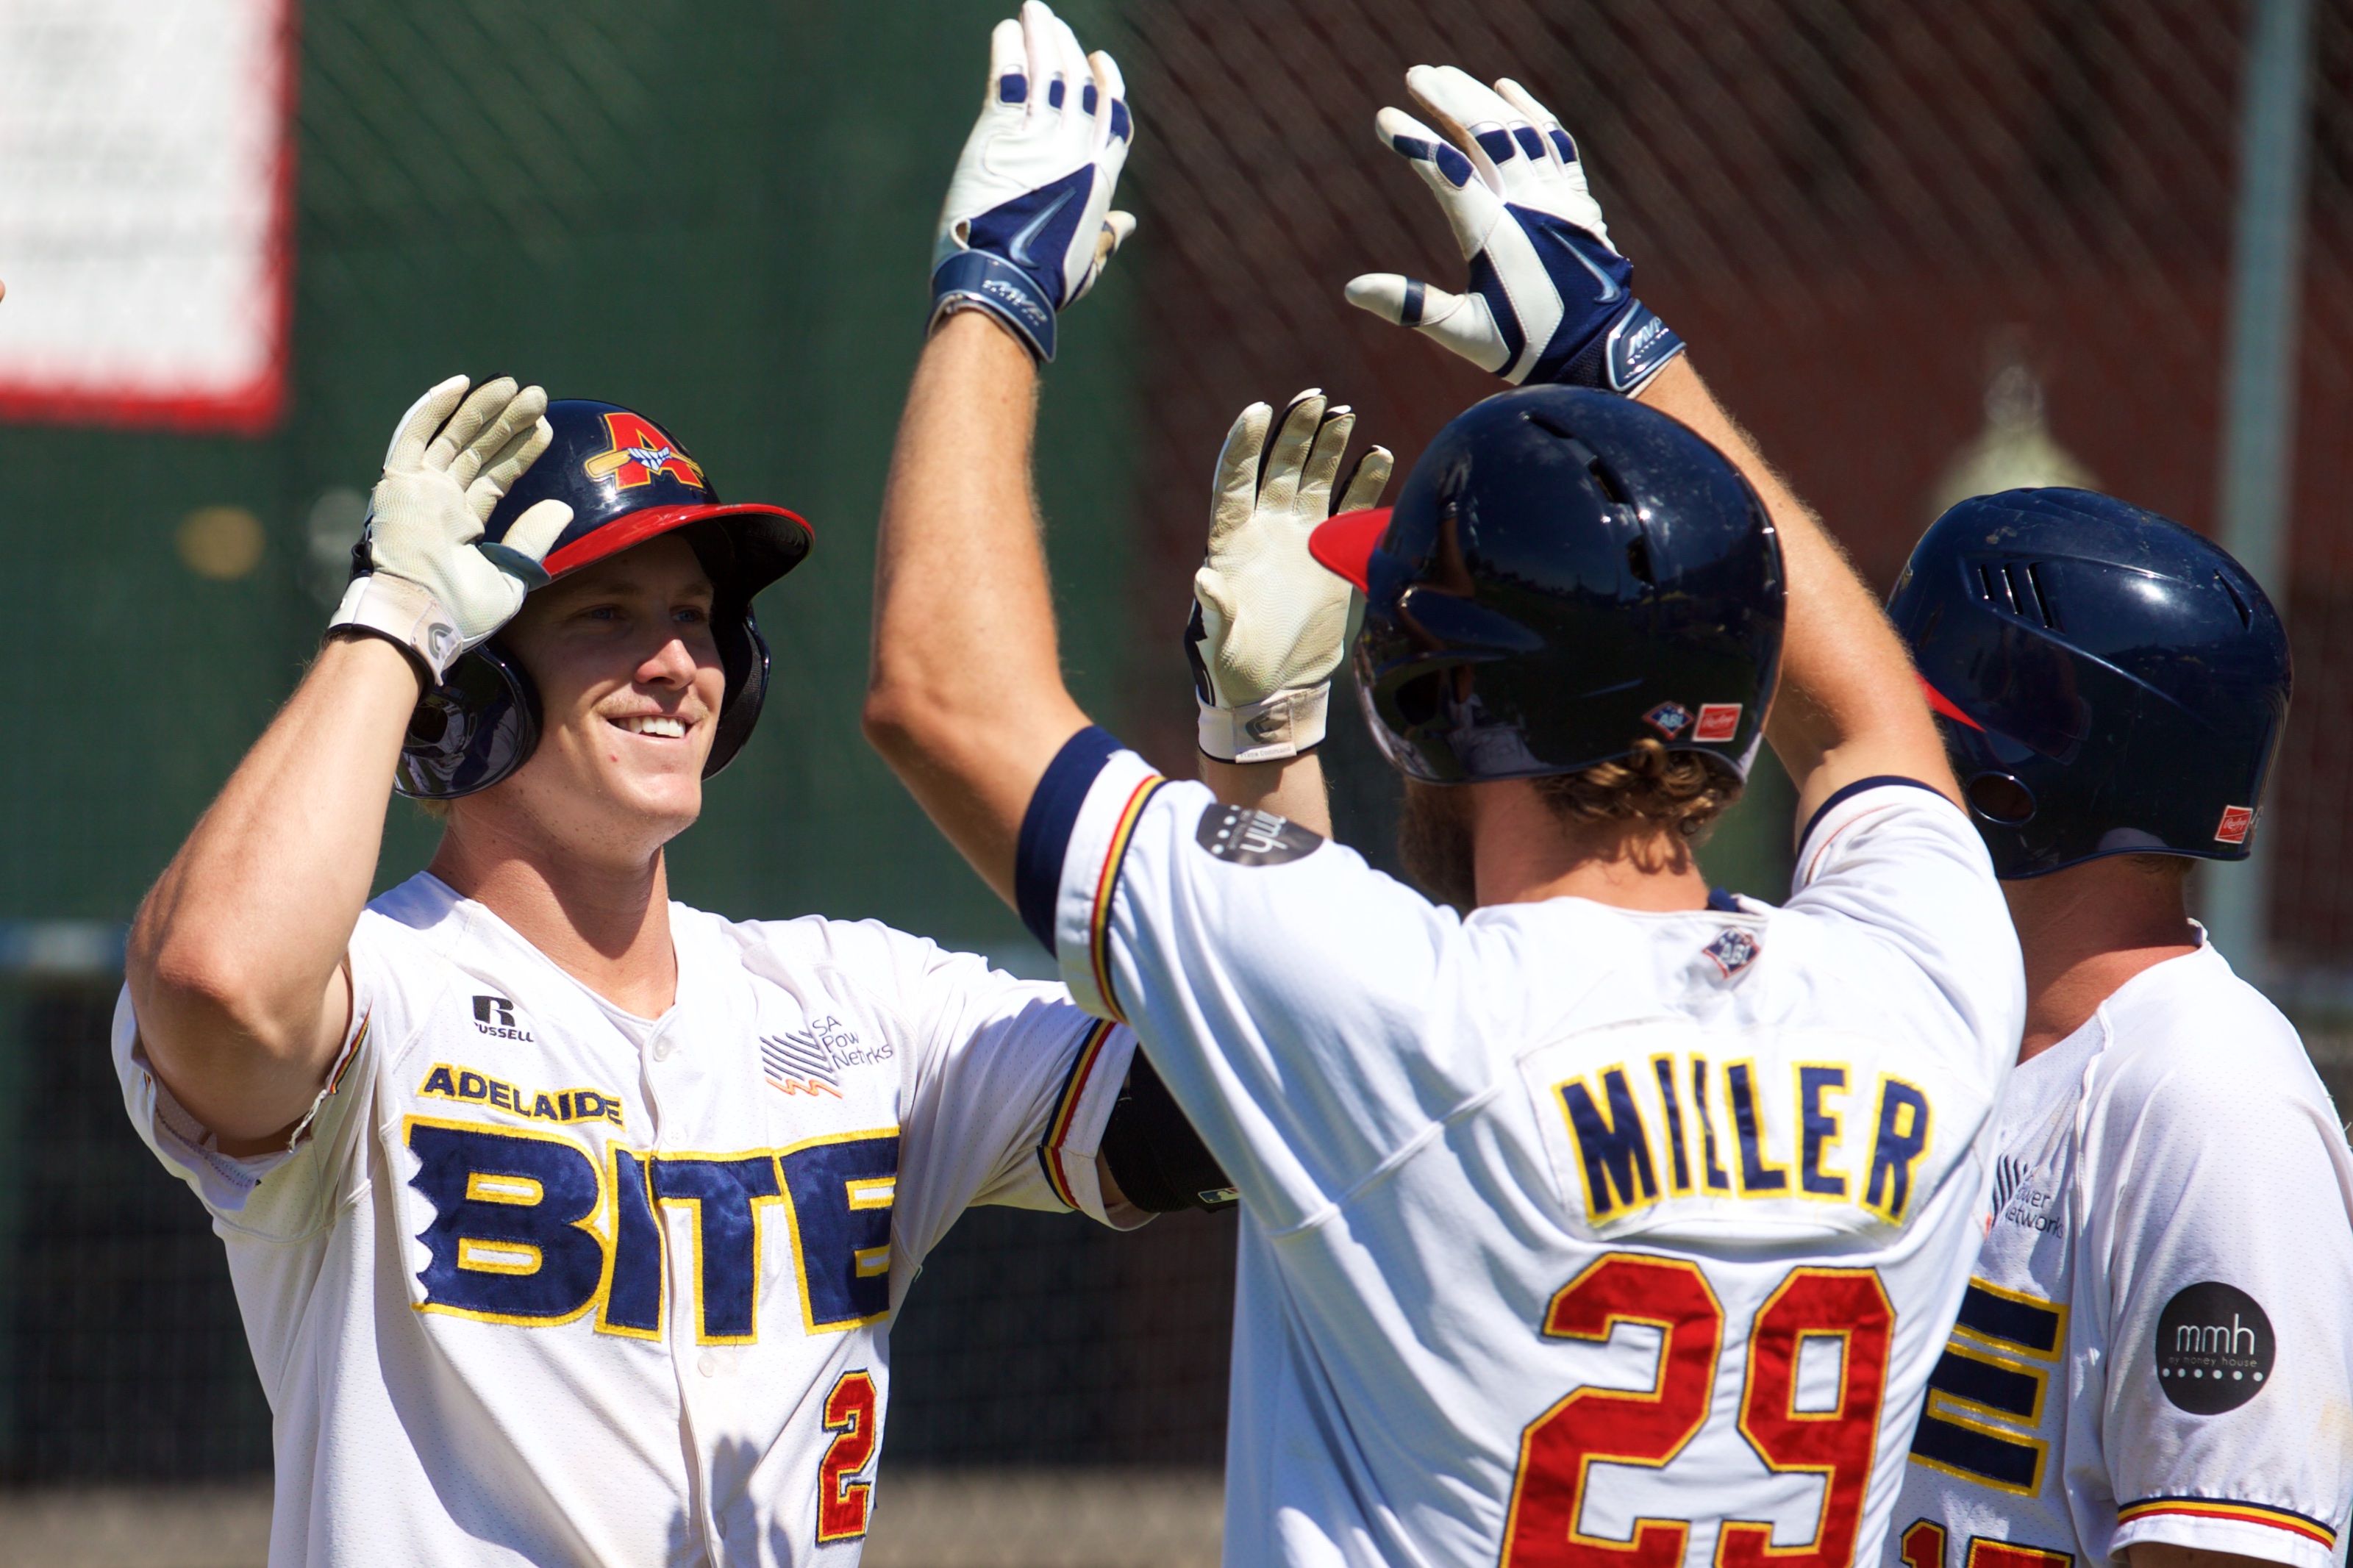 Dodgers minor leaguers Brandon Dixon and Aaron Miller led the Adelaide Bite offense this winter.